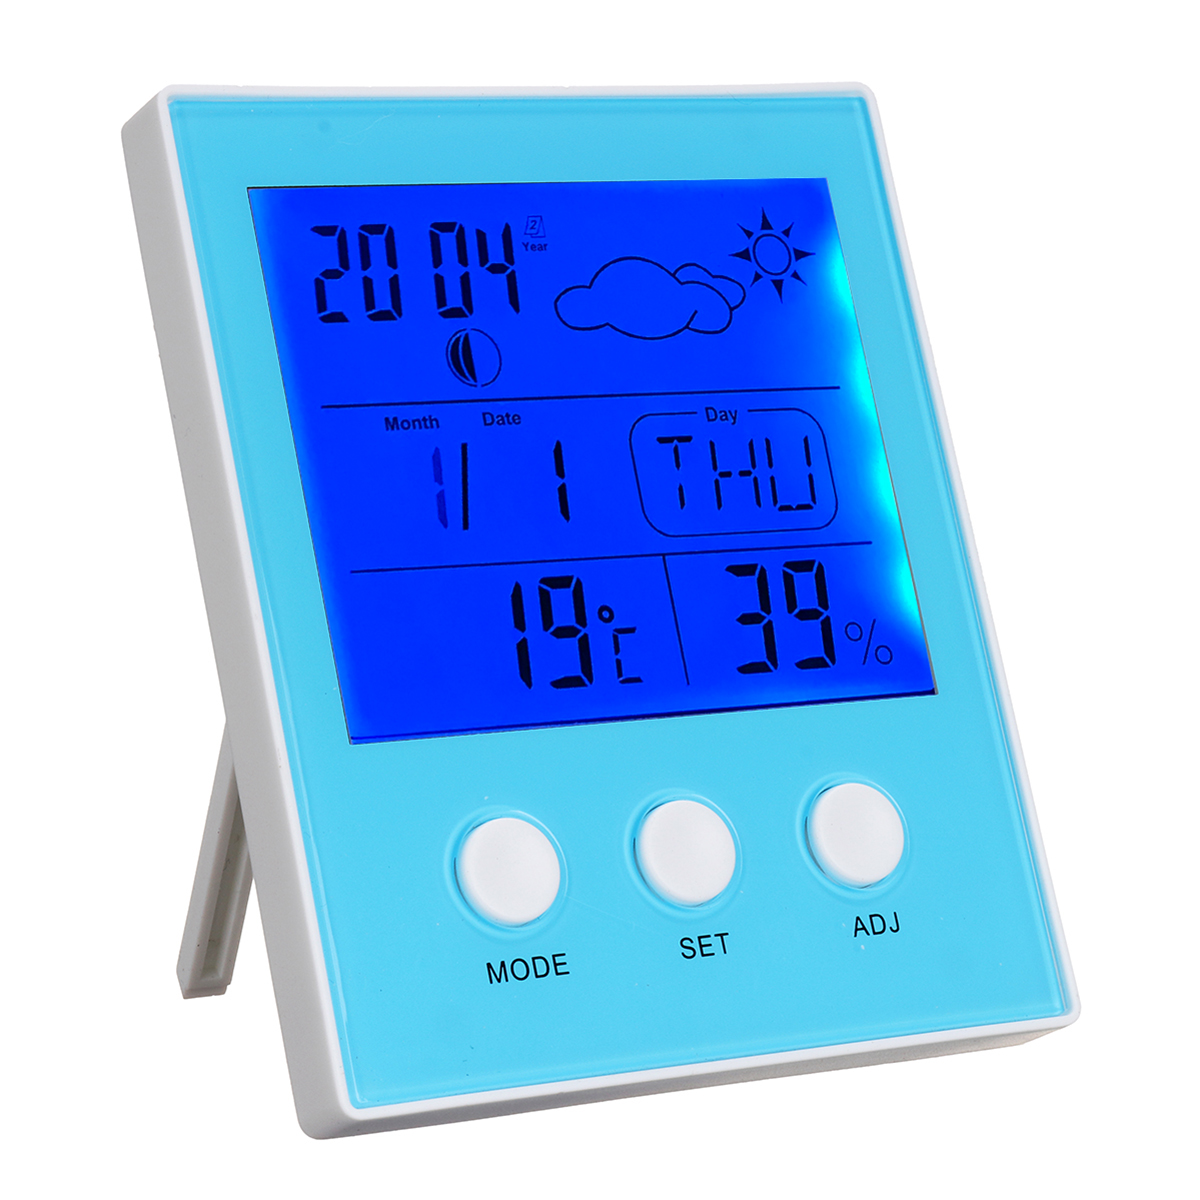 

CH-904 Digital Thermometer Hygrometer Temperature Humidity Tester LED Backlight Time Date Calendar Alarm Clock Display Indoor